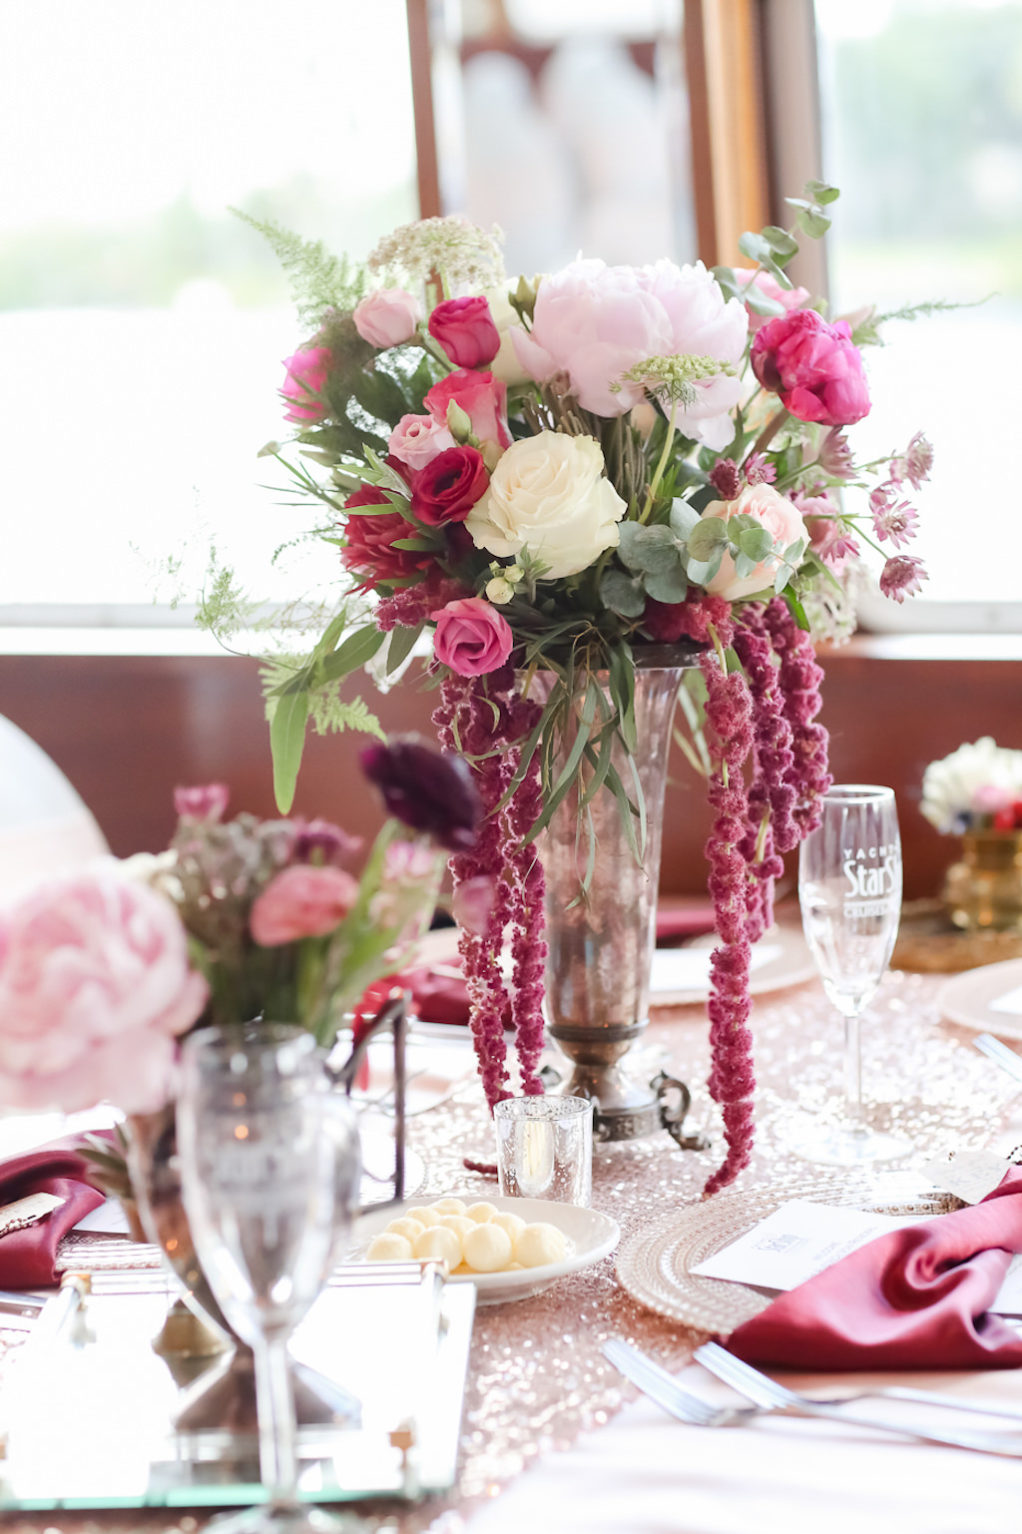 French Country Colorful Inspired Wedding Reception Decor, Blush Pink, Pink, Ivory and Greenery Floral Centerpiece and Pink Hanging Amaranthus in Glass Vase and Sparkle Blush Pink Linens | Tampa Bay Wedding Photographer Lifelong Photography Studio | Wedding Rentals Kate Ryan Event Rentals